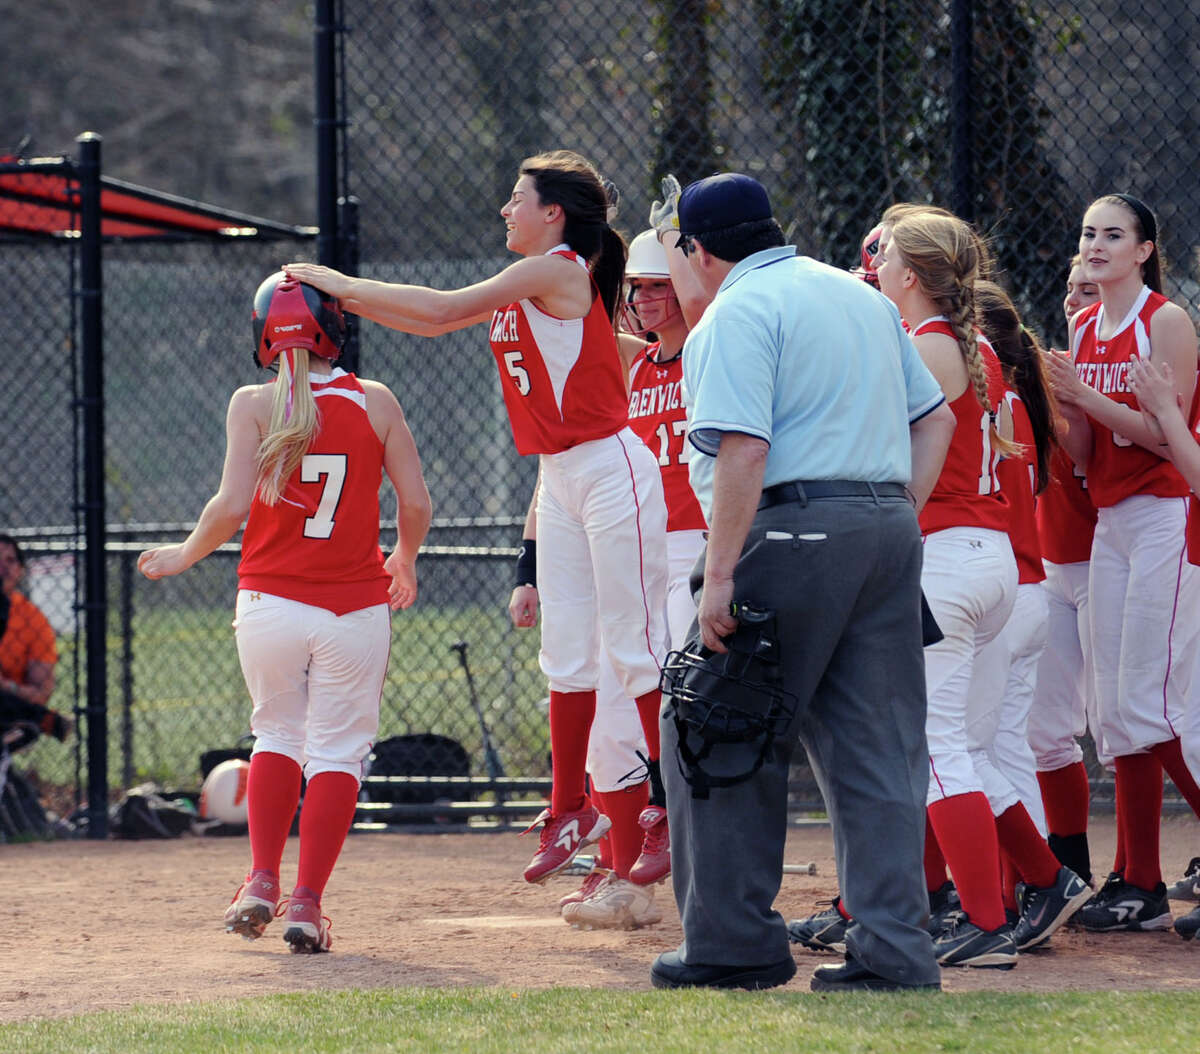 At left, Rebecca DeCarlo # 7 of Greenwich is congratulated by Jennifer Ambrogio # 5 and her teammates after hitting a homerun to lead off the game for Greenwich in the bottom of the first inning during the girls high school softball game between Greenwich High School and Stamford High School at Greenwich, Wednesday, April 10, 2013. Greenwich won the game 7-5 to remain unbeaten.